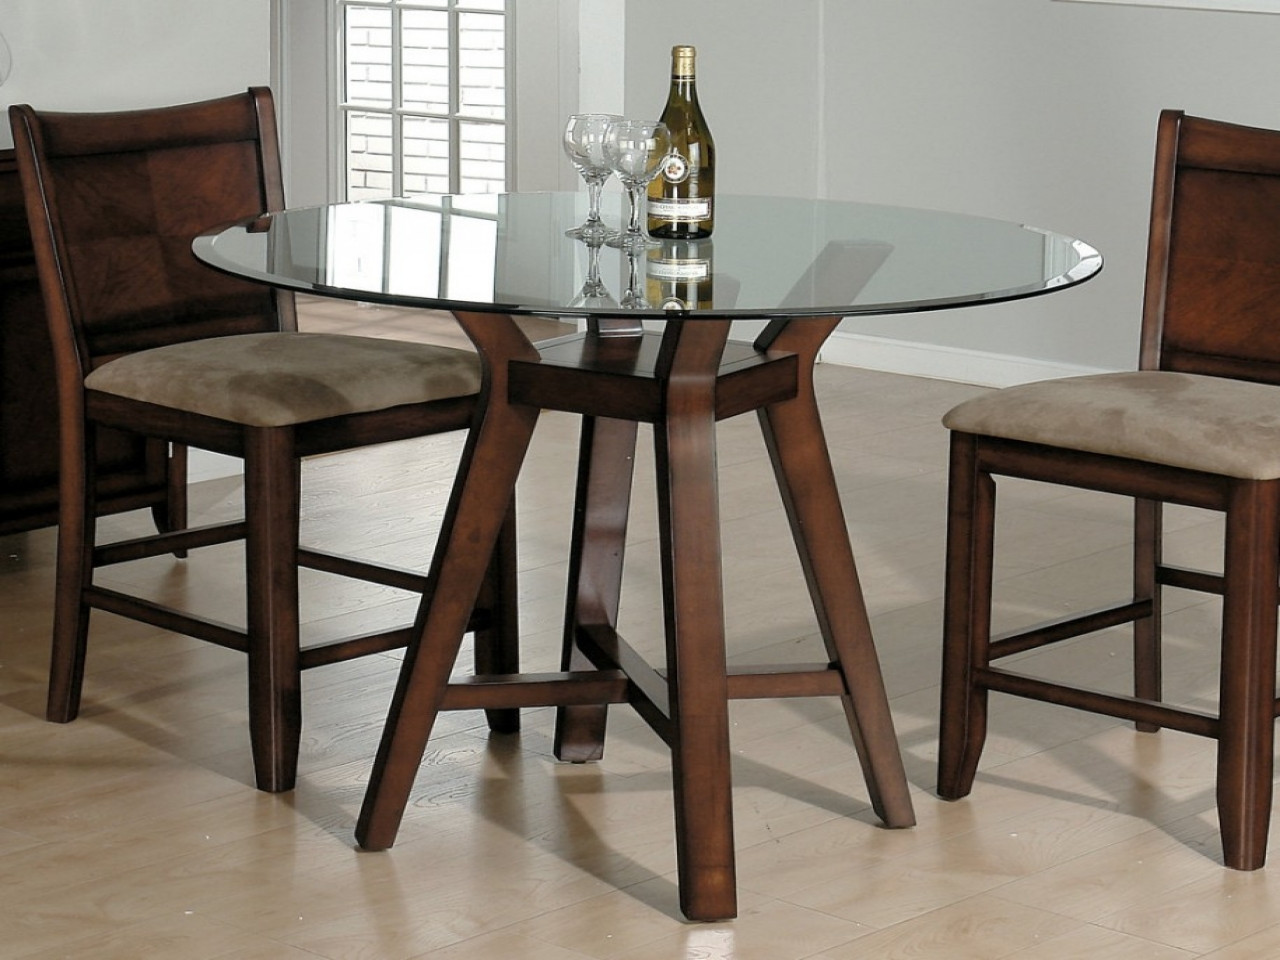 Small Kitchen Table Sets
 Glass table and chairs set small kitchen dining table and